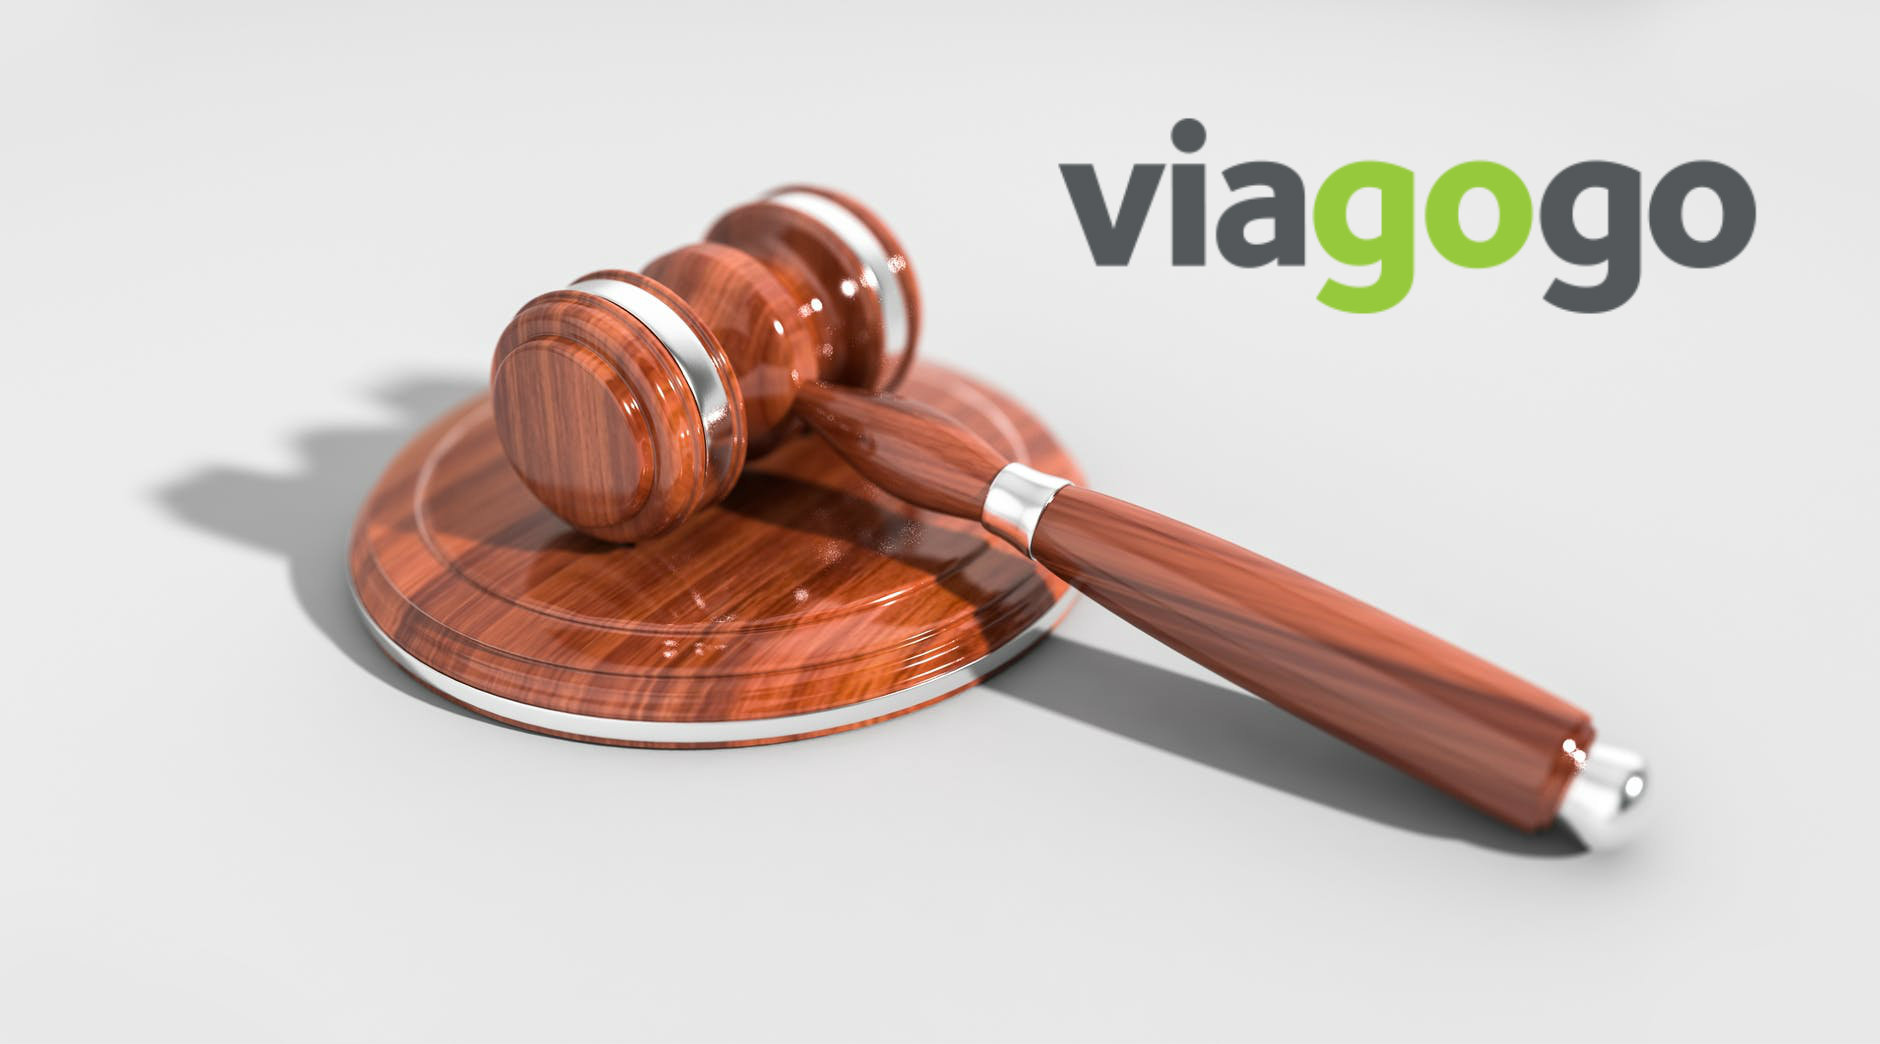 Viagogo feels more heat in UK: “We take the CMA’s concerns very seriously.”